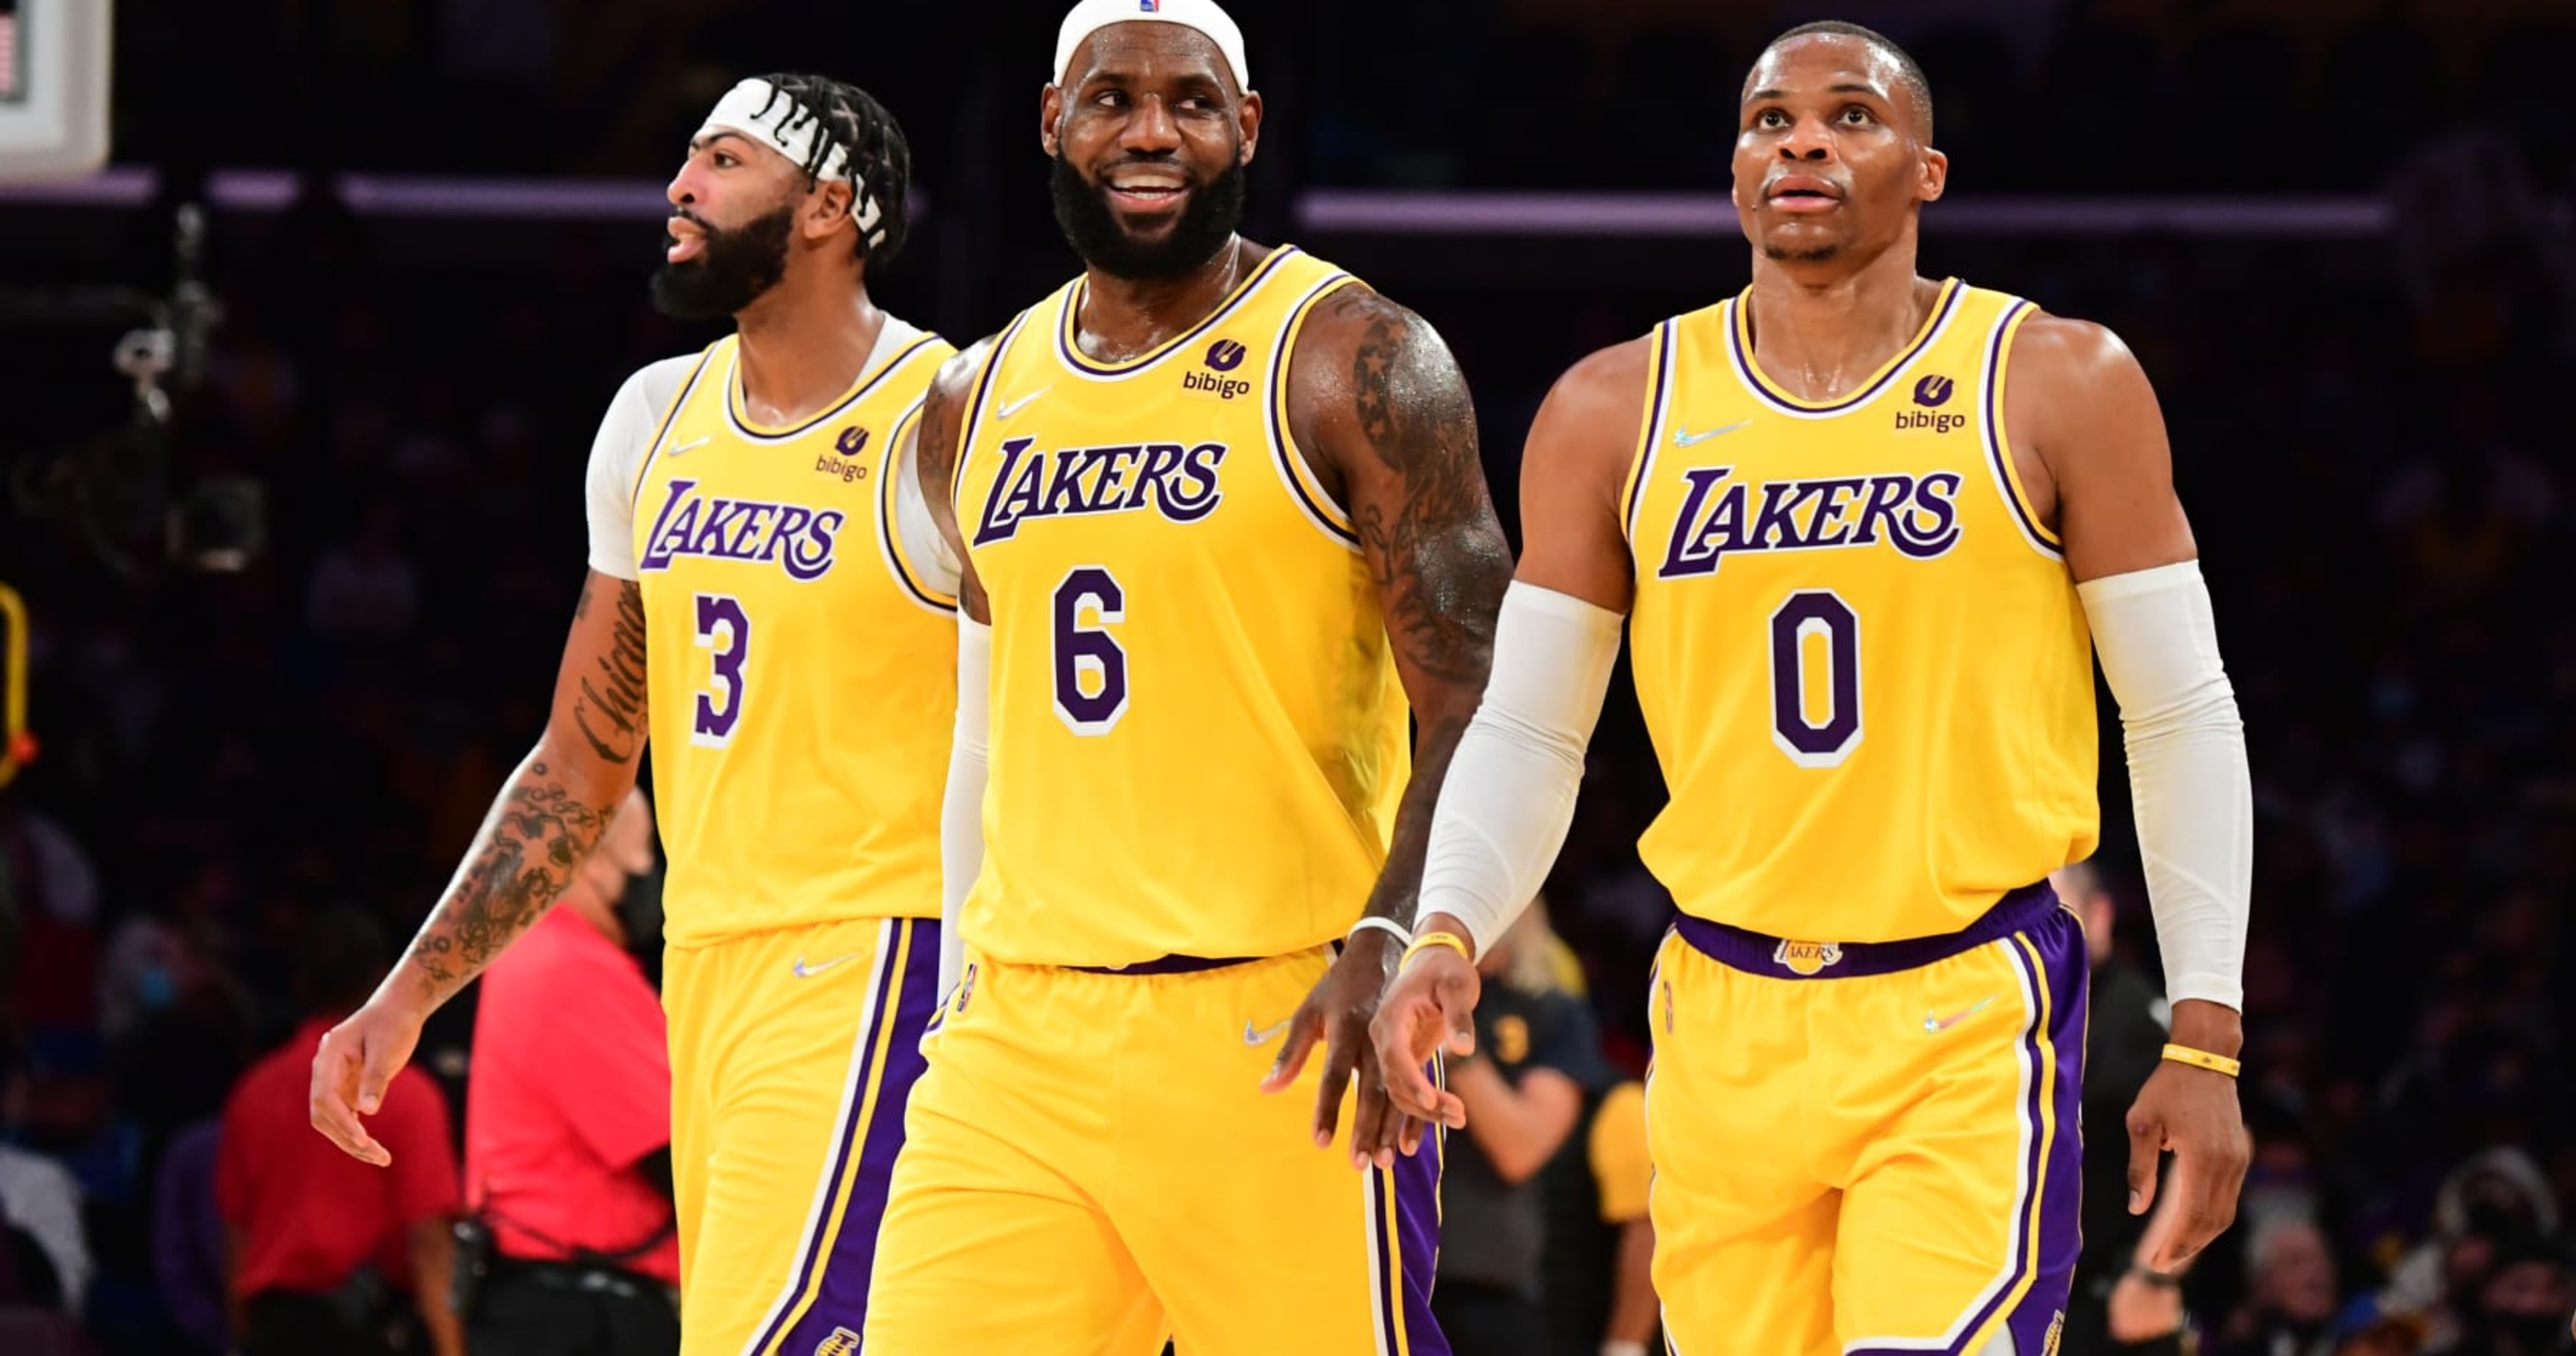 Lakers 202223 Schedule Top Games, Championship Odds and Record